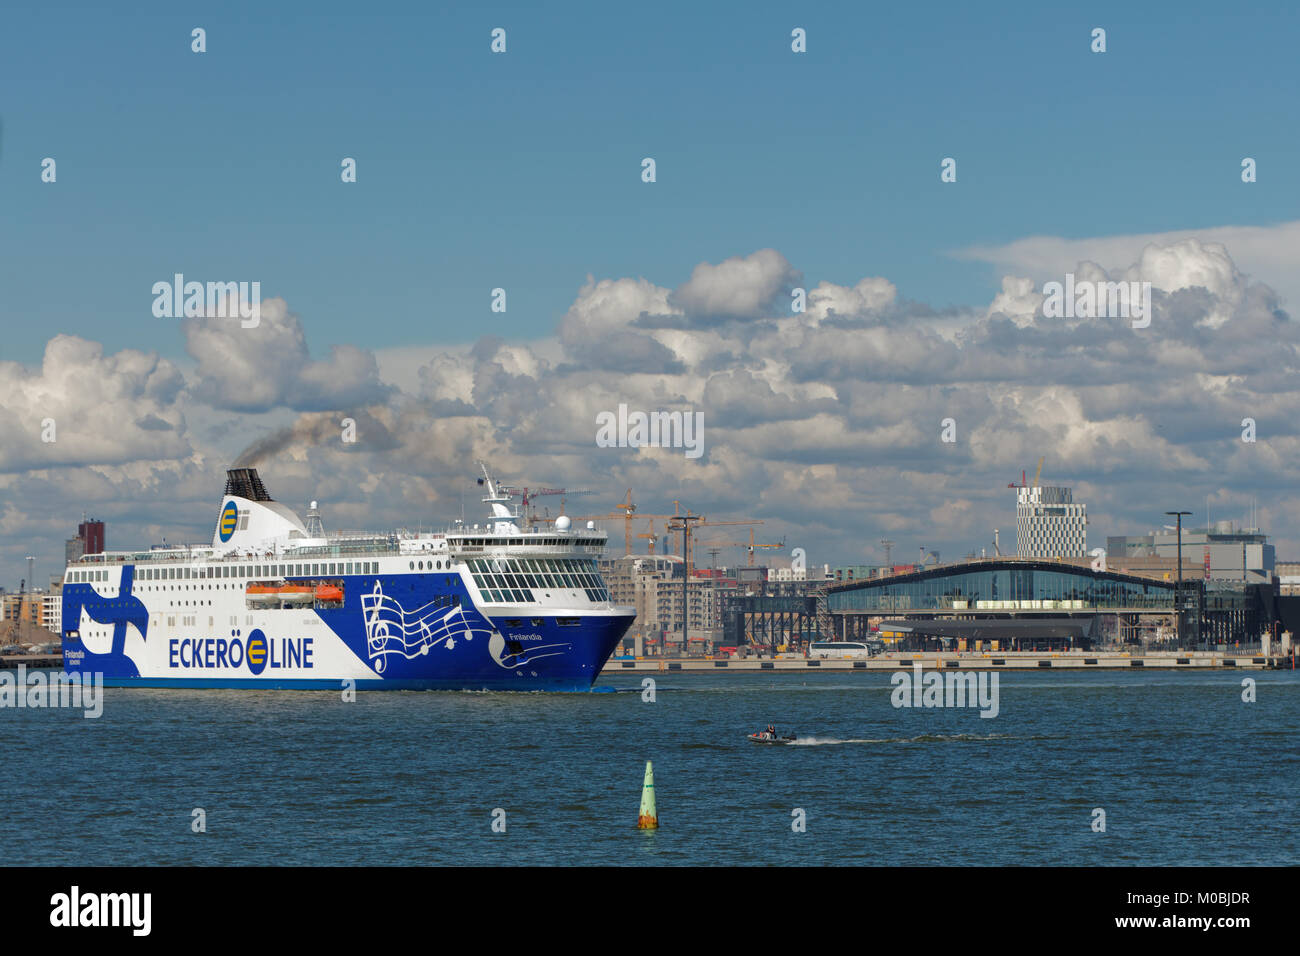 Helsinki, Finland - August 20, 2016: Cruiseferry Finlandia of Eckero Line departs to Tallinn. Built in 2001, the ship has capacity for 2080 passengers Stock Photo